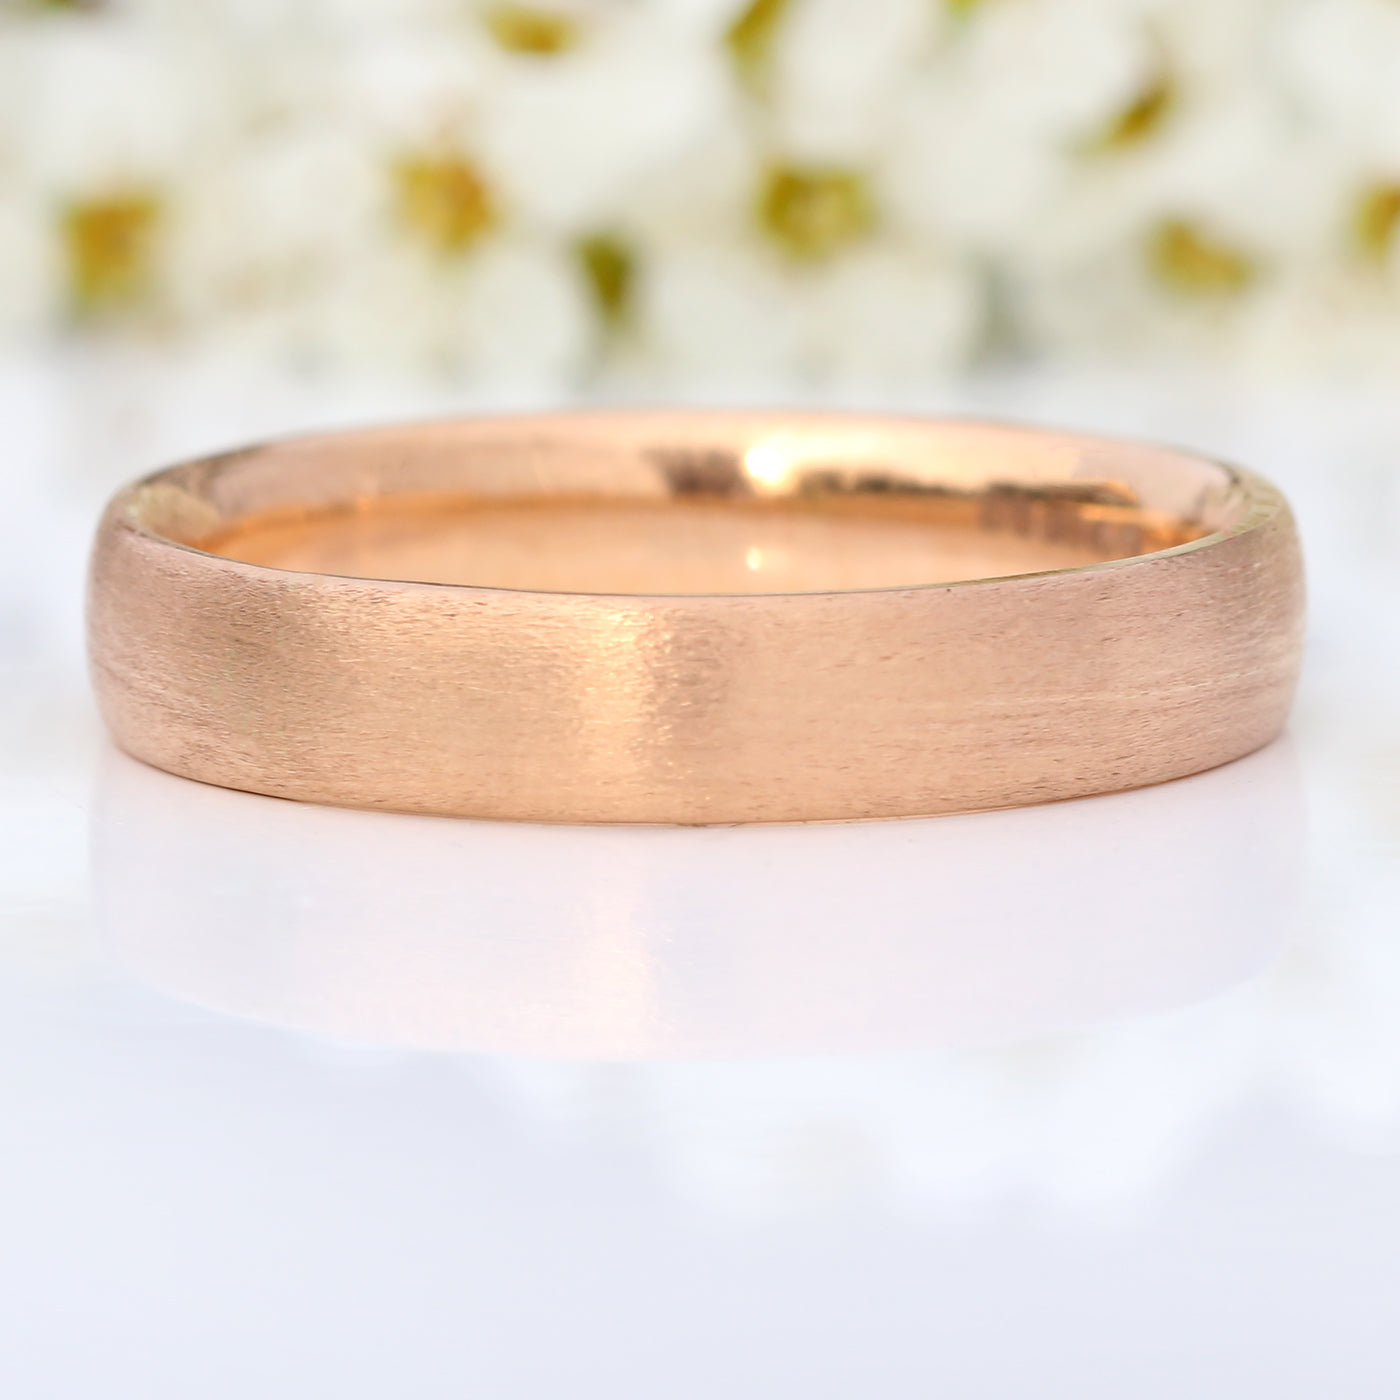 4mm 18ct rose gold comfort fit wedding ring